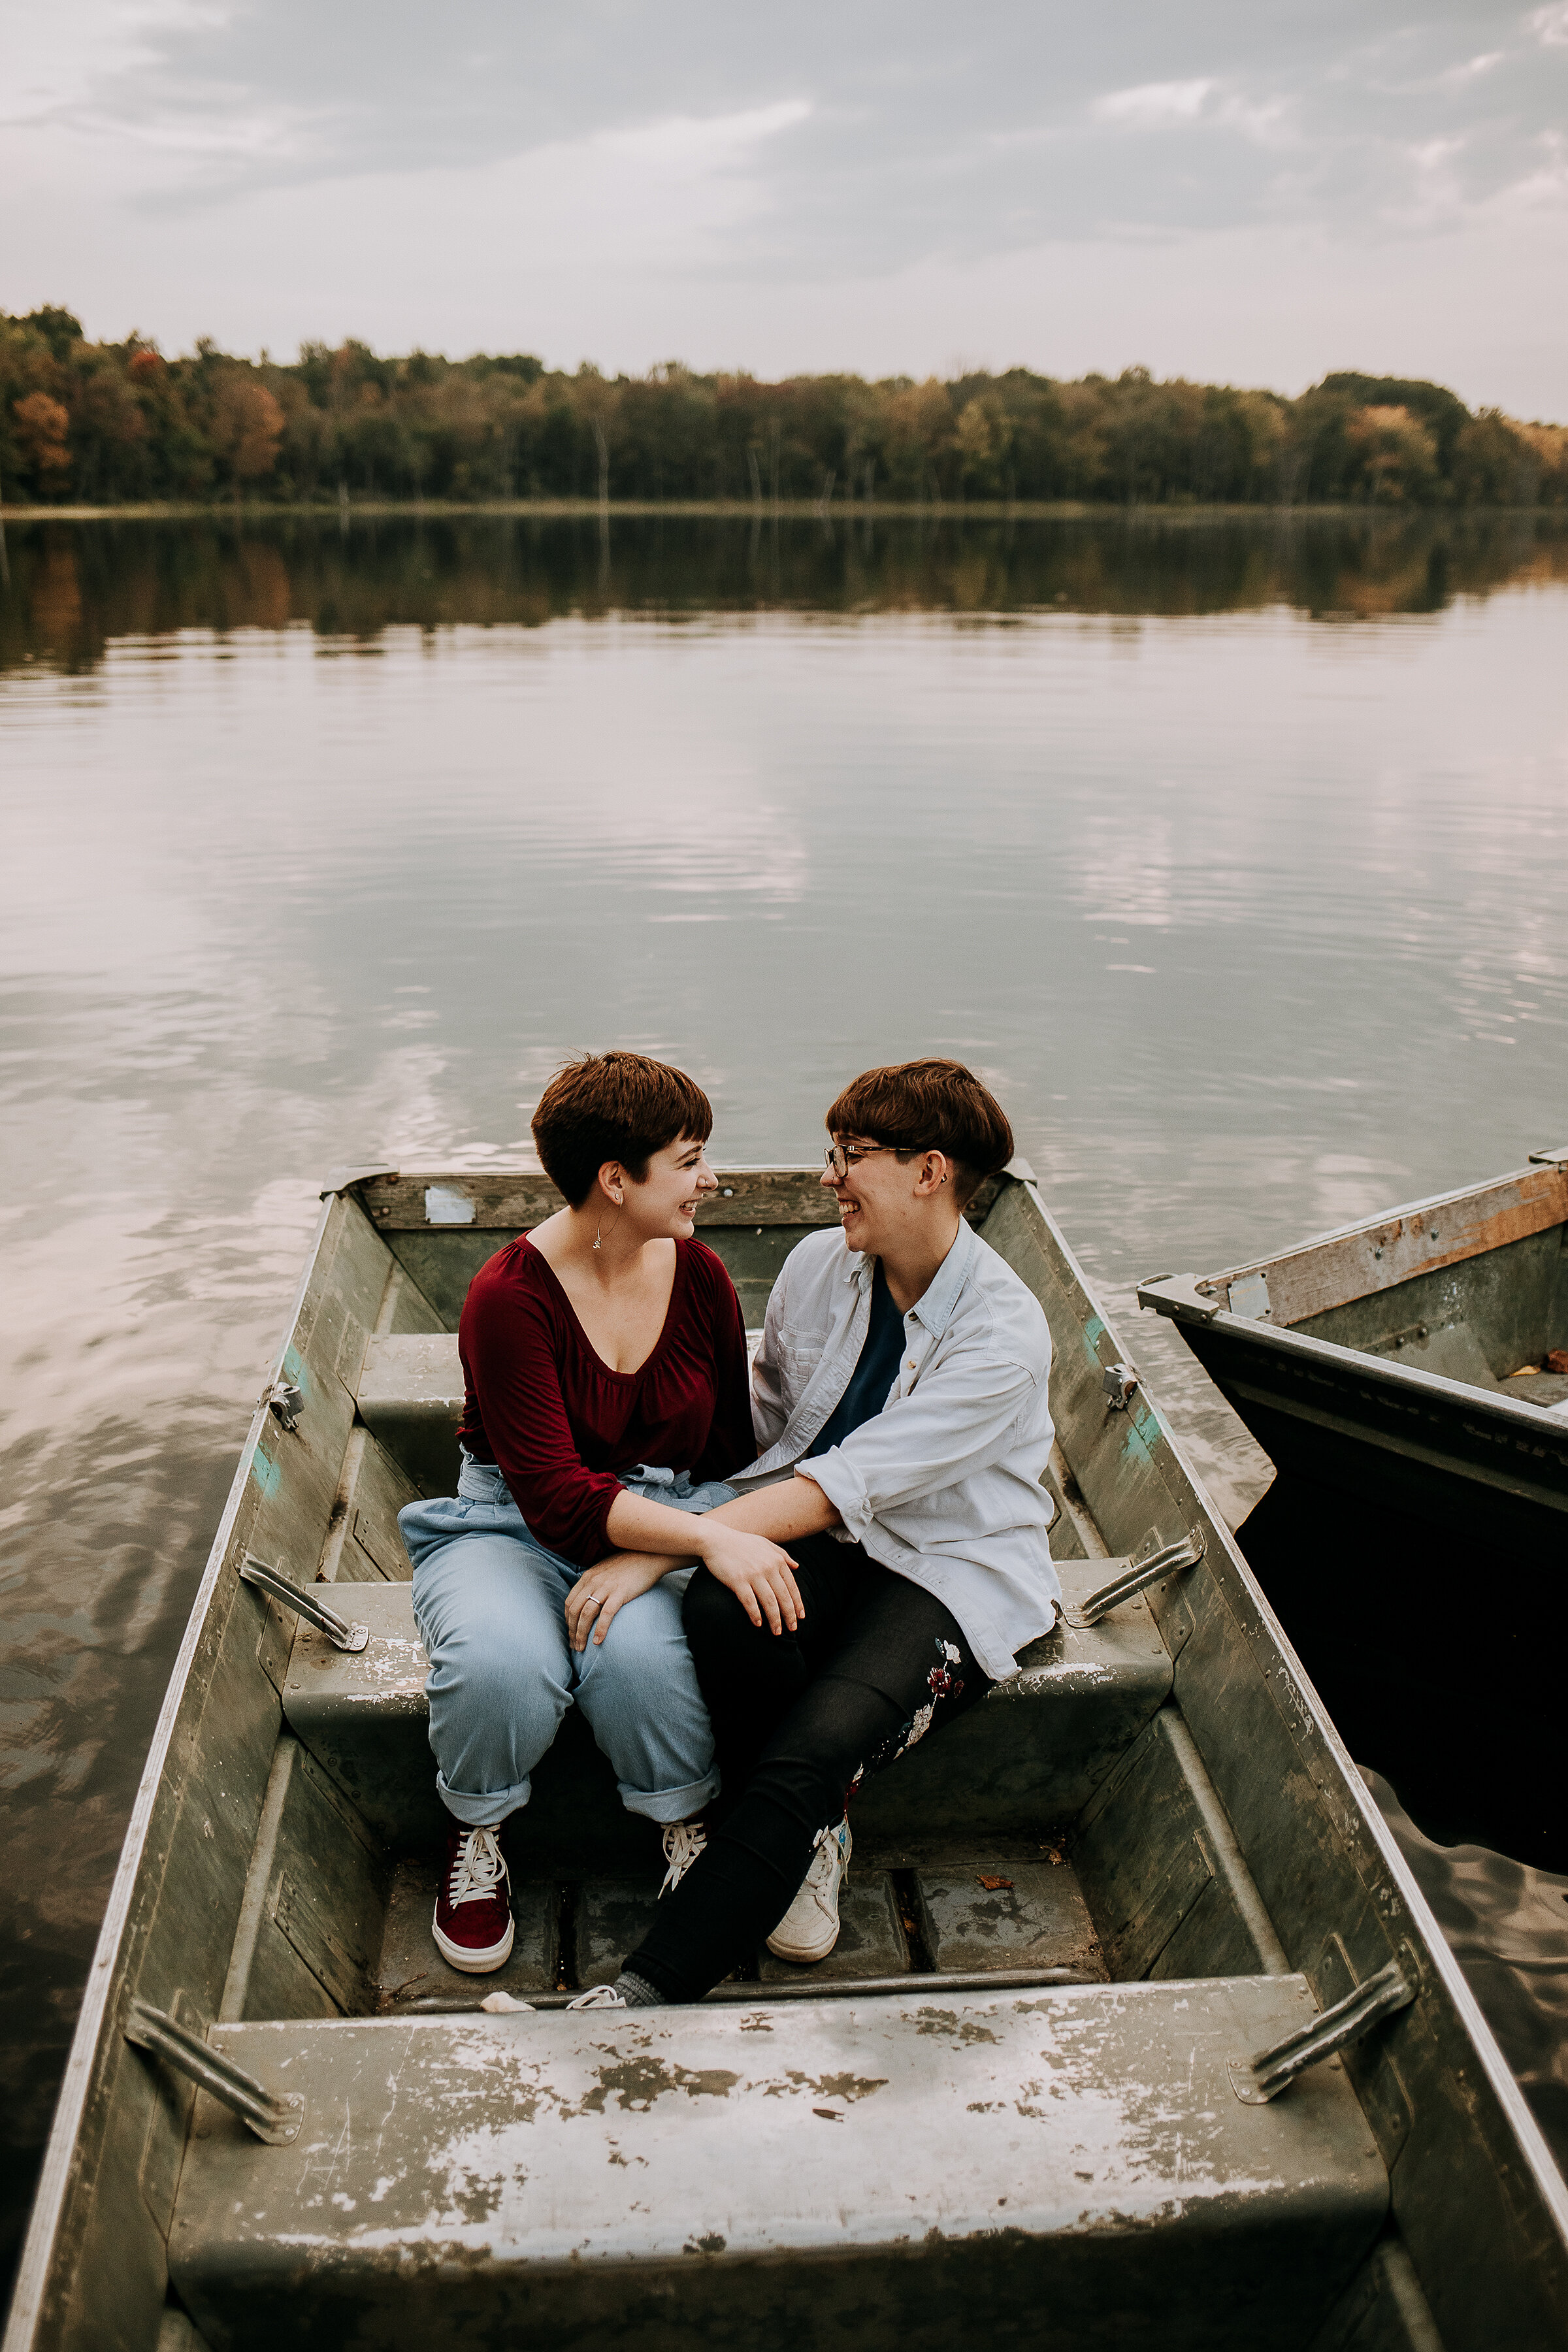  Beautiful couple in a boat by the dock on a lake wearing maroon and gray in this engagement photoshoot by Kindred + Co in Indiana. boat photoshoot dock by lake photoshoot indiana fort wayne engagement photoshoot locations maroon and gray same-sex co